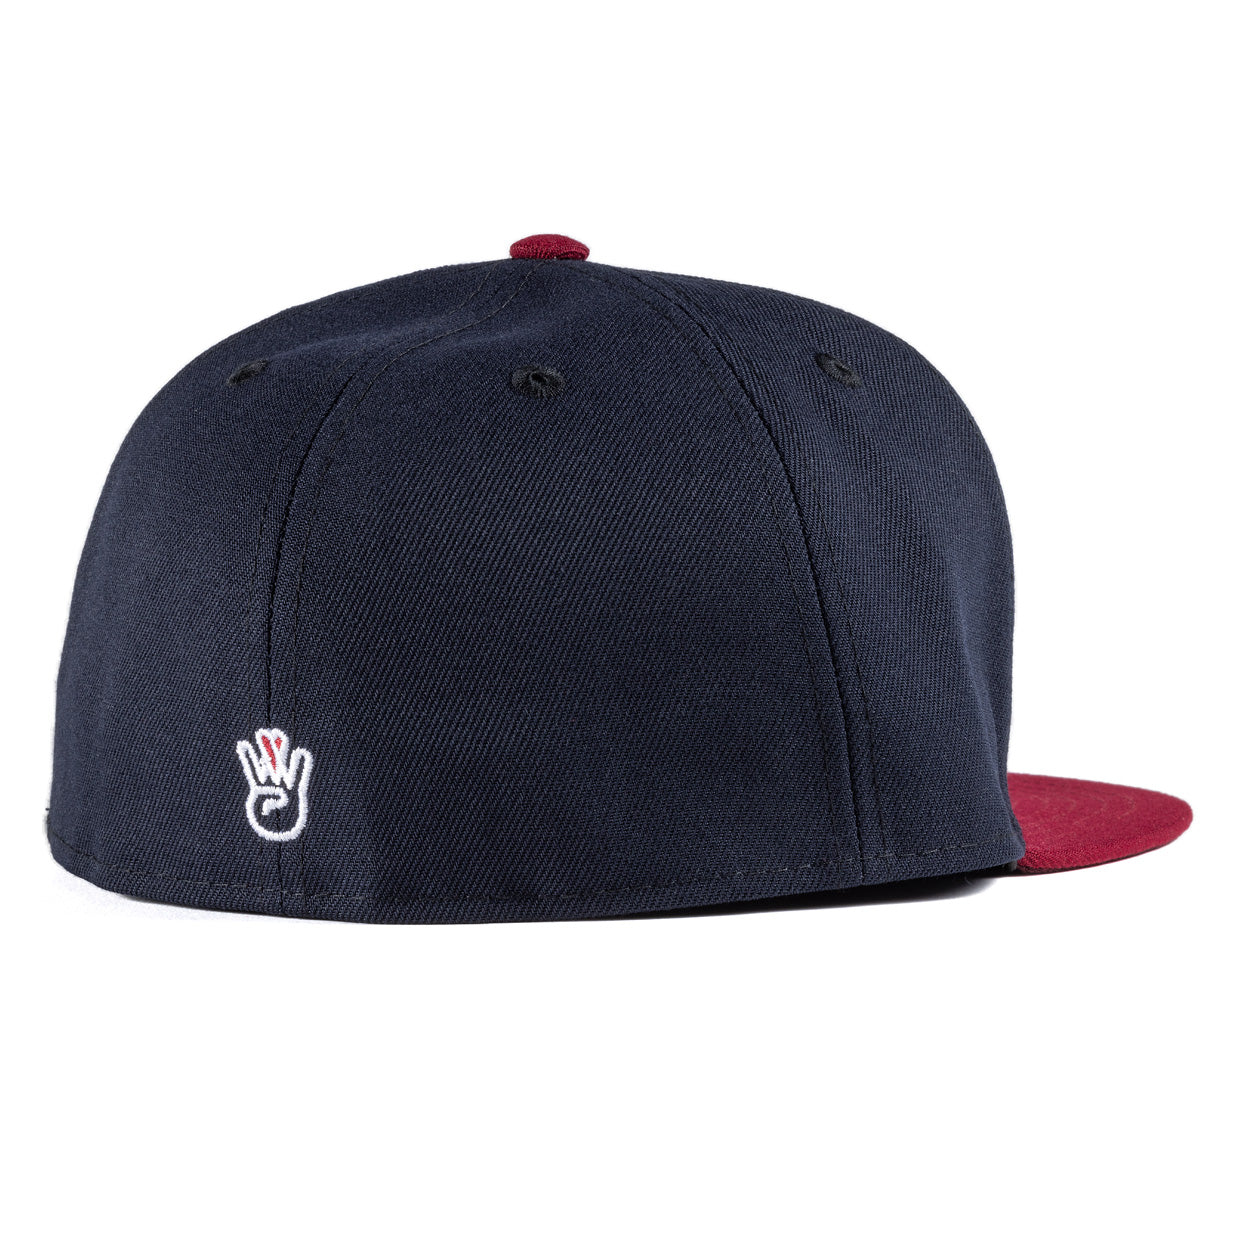 Capitol New Era Fitted